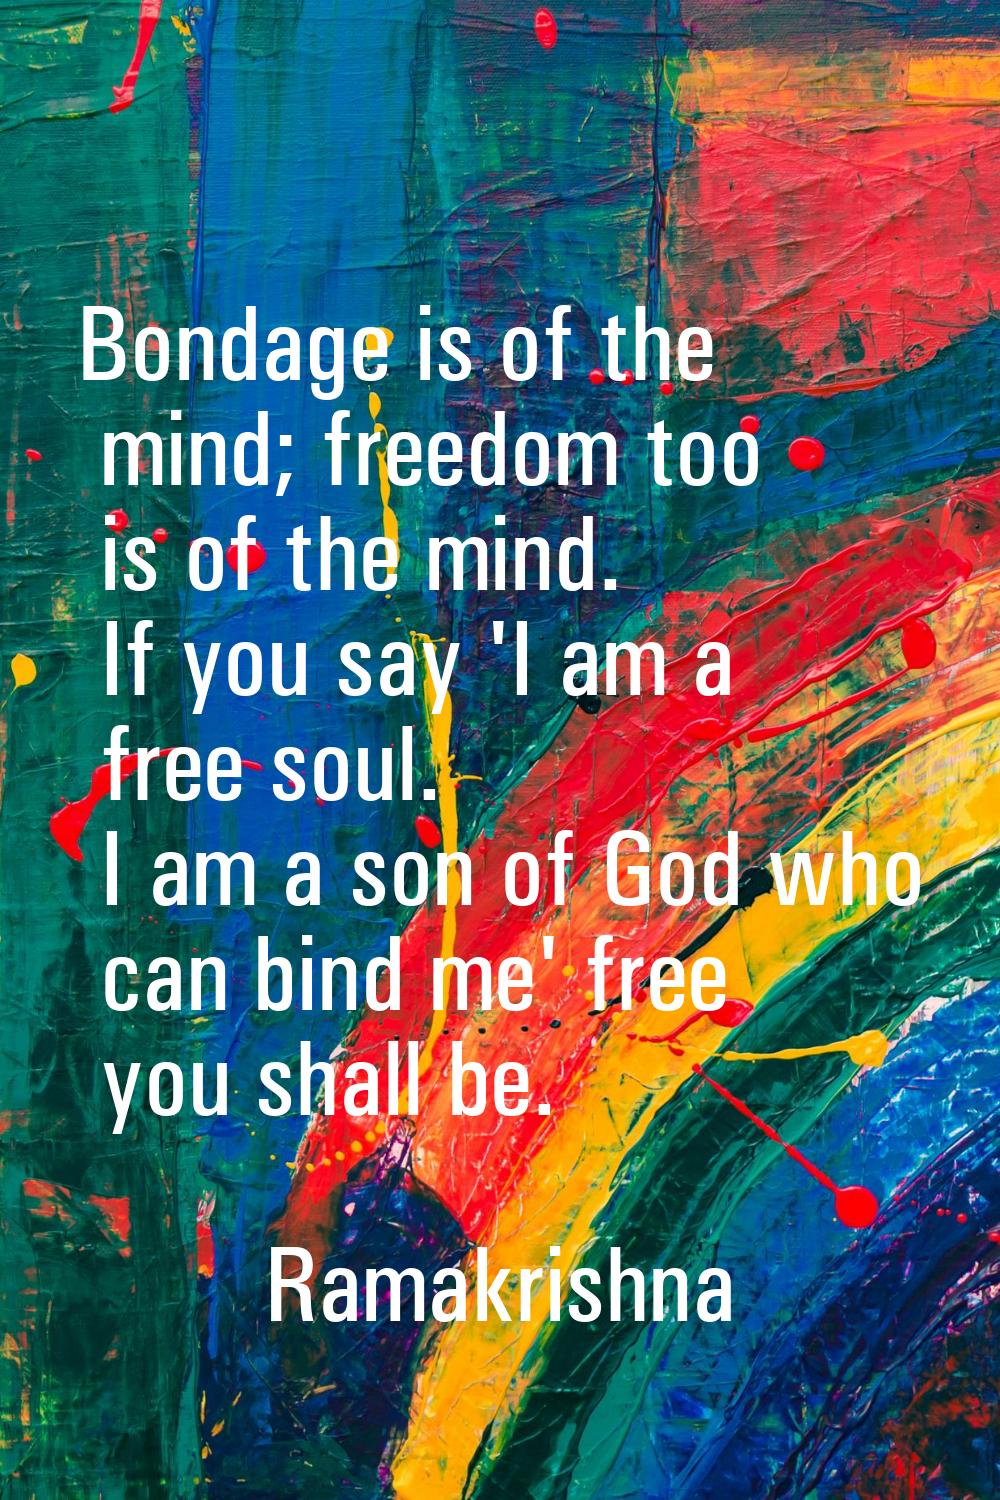 Bondage is of the mind; freedom too is of the mind. If you say 'I am a free soul. I am a son of God